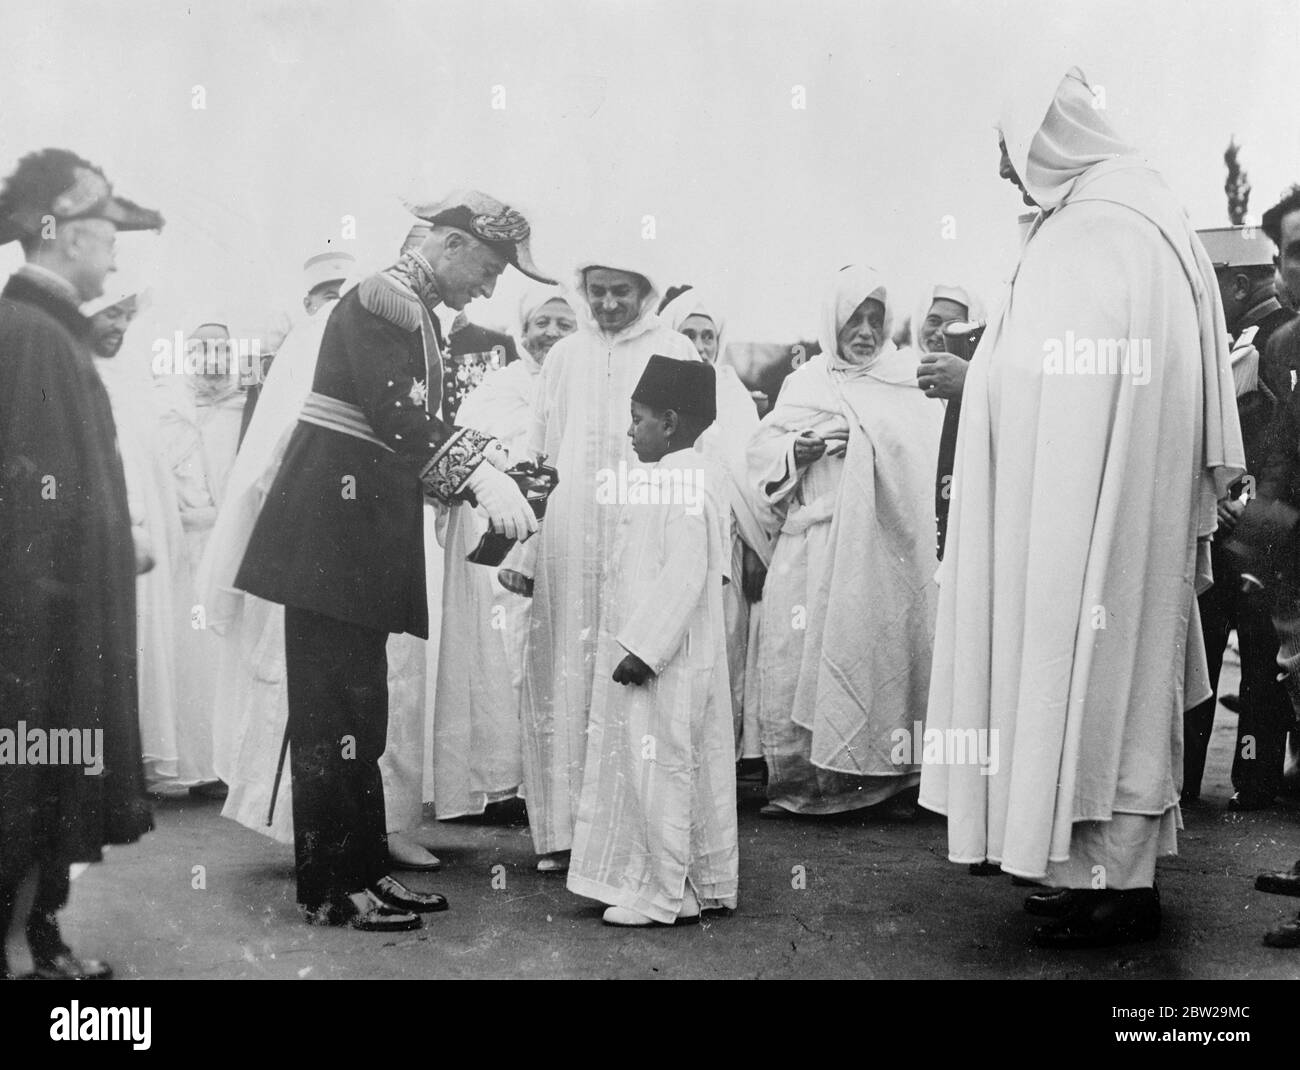 Impressive decoration for a little Prince. General Nogues, representing President LeBrun, in the mist of a gathering of picturesquely robed chieftains, presents the Cross of a French Order to the young son of the Moroccan Sultan during the celebrations commemorating the Sultan's ascension to the throne. 21 November 1937 Stock Photo